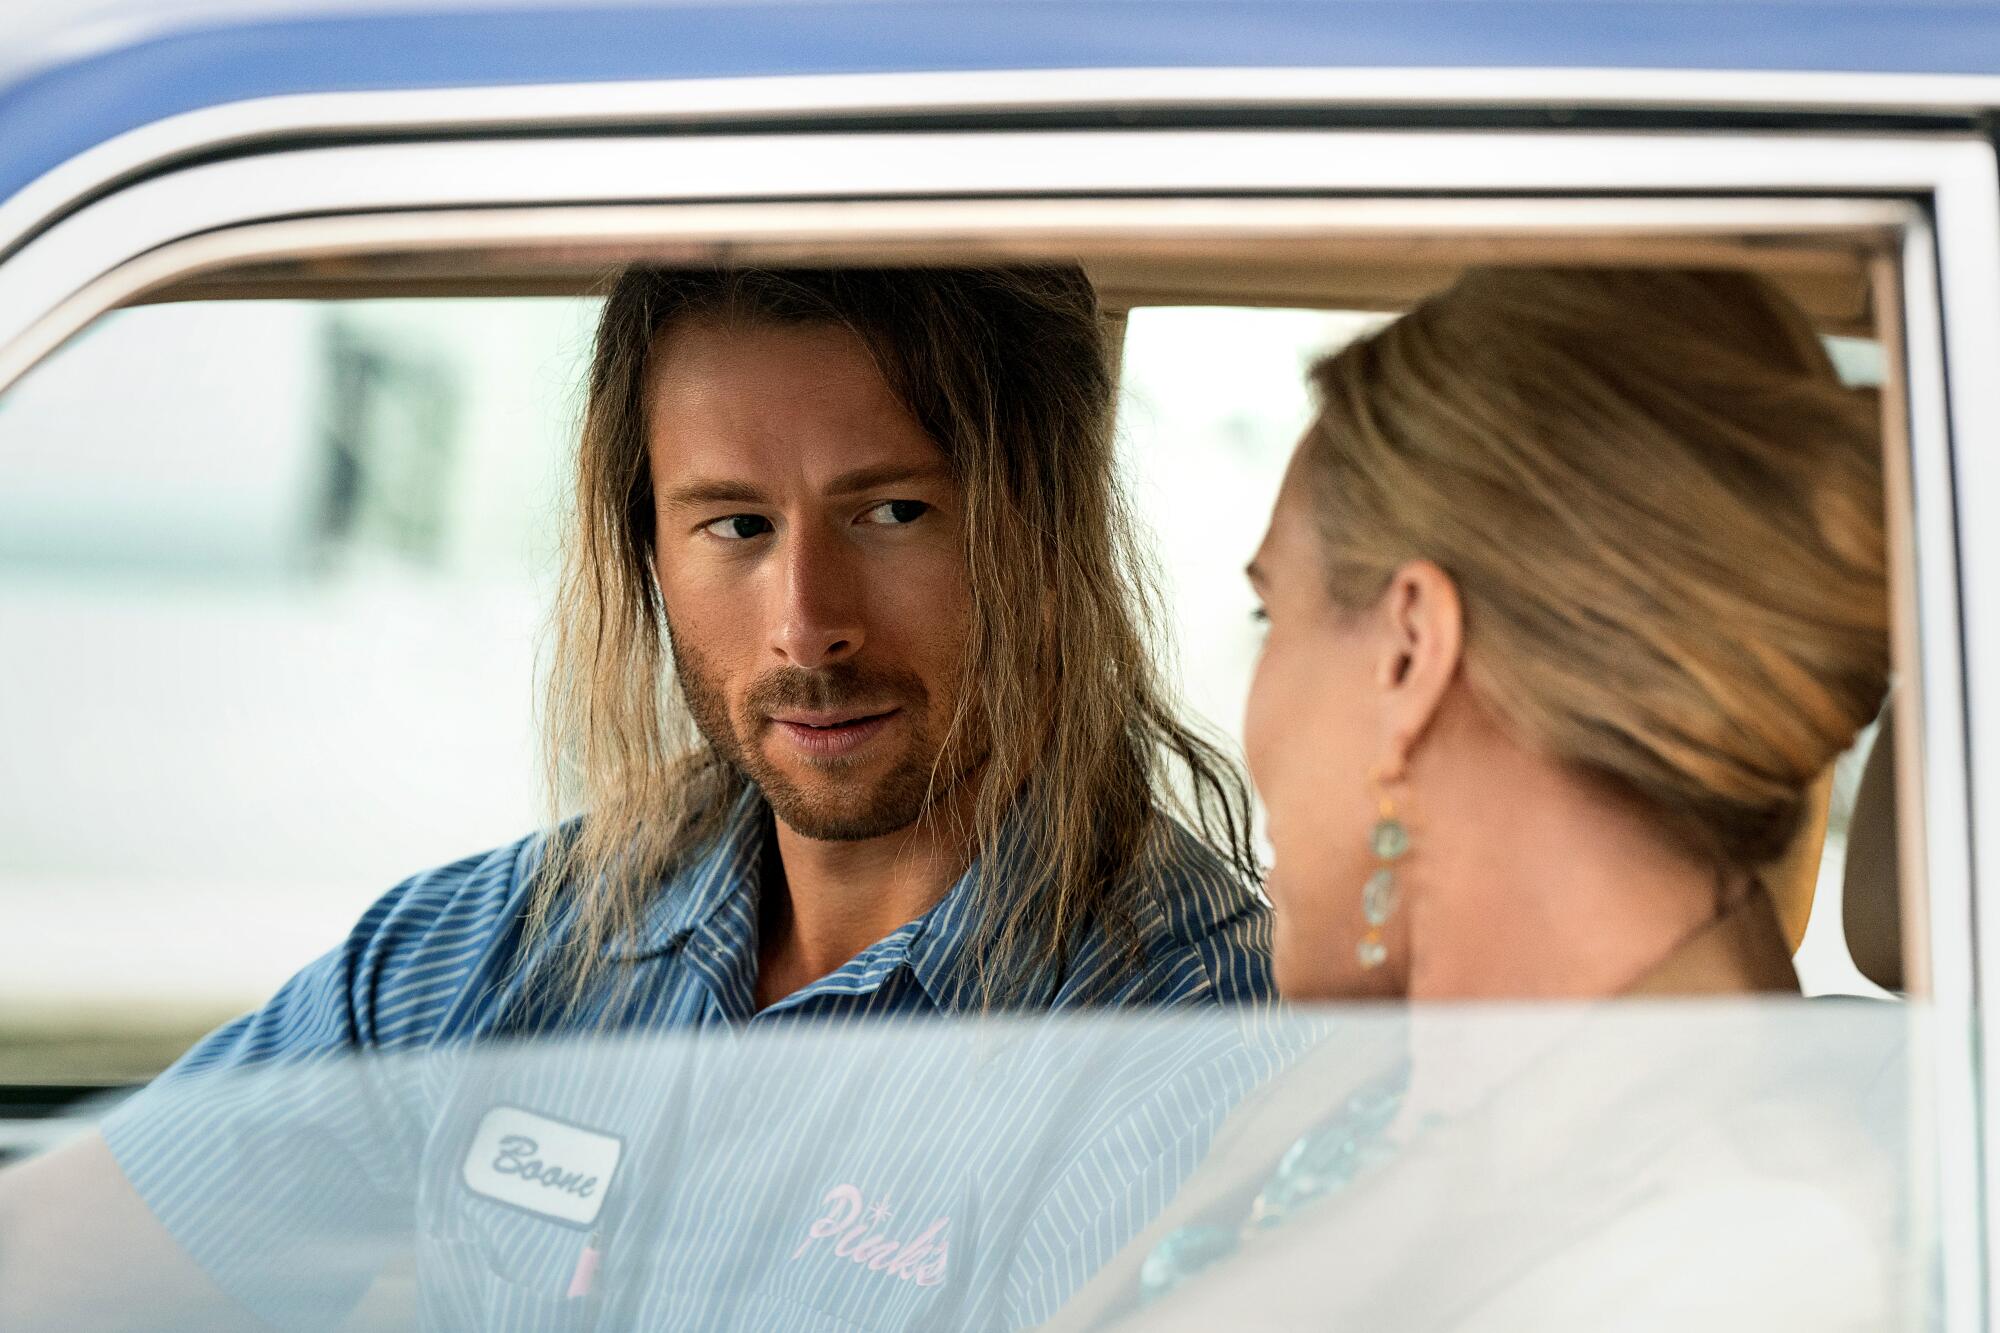 A man with scraggly long hair sits in a car talking to a woman